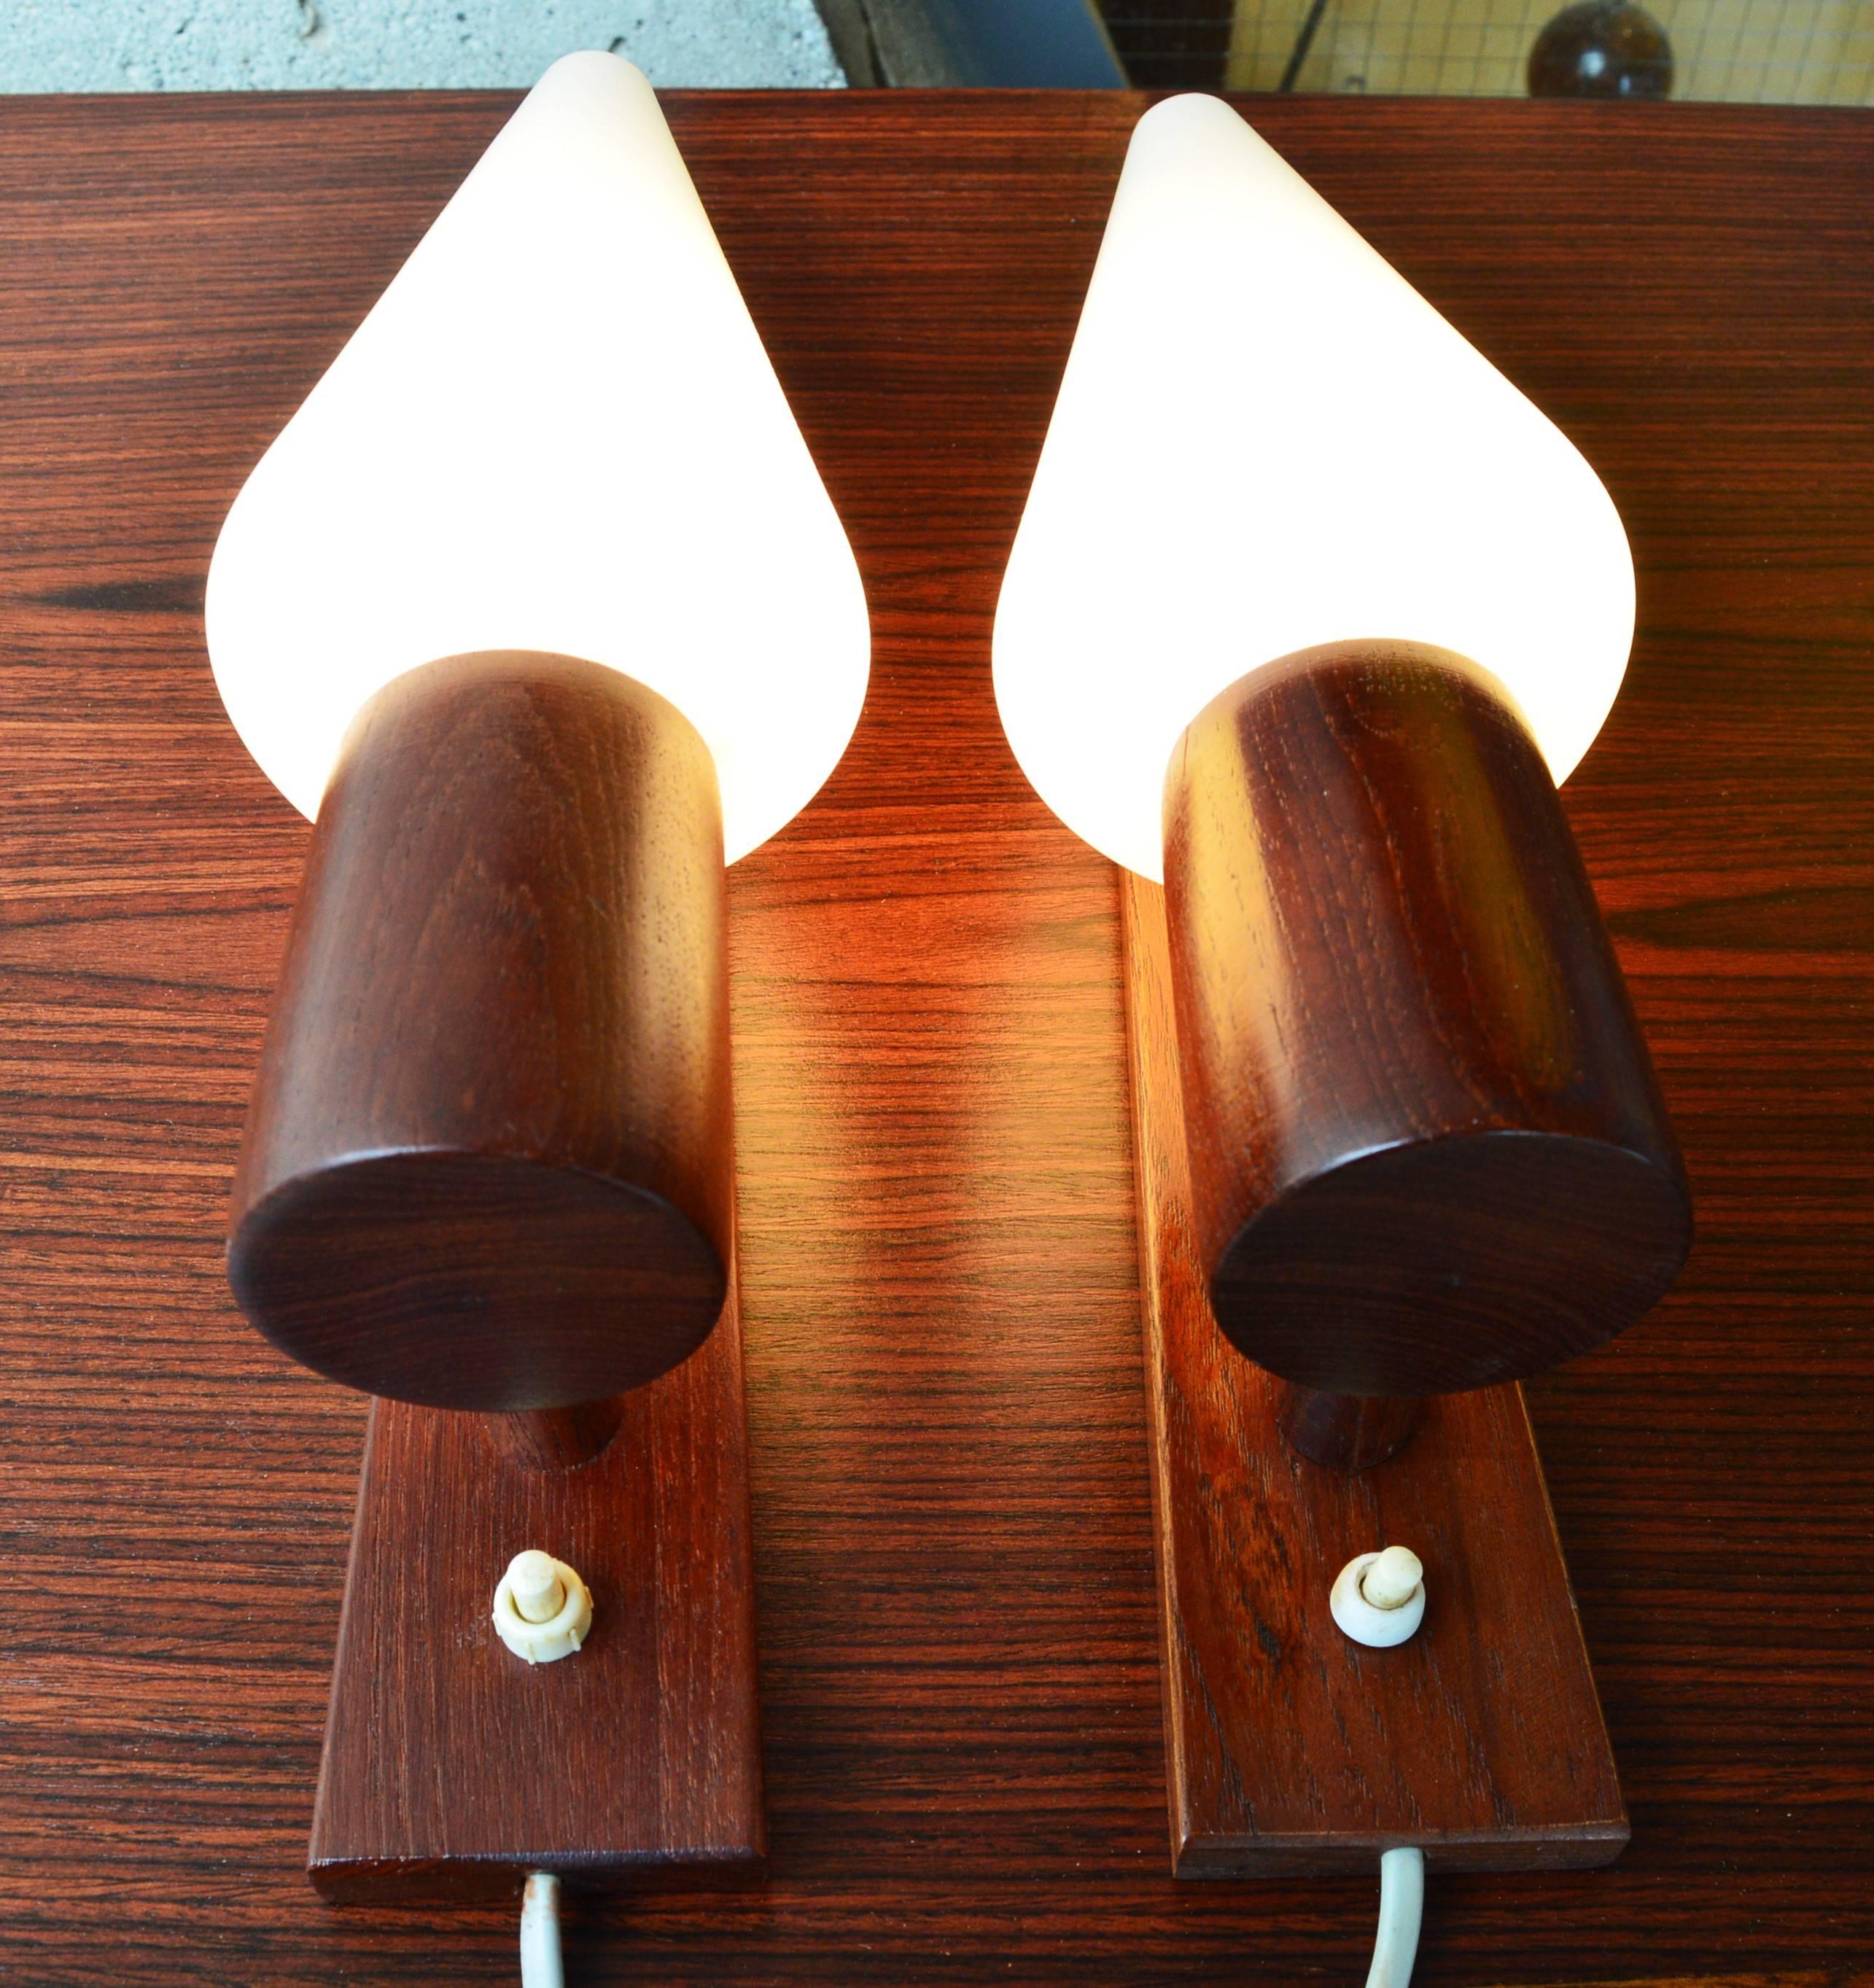 Mid-20th Century Pair of Danish Modern Teak Wall Sconces with Conical Frosted White Glass Shades